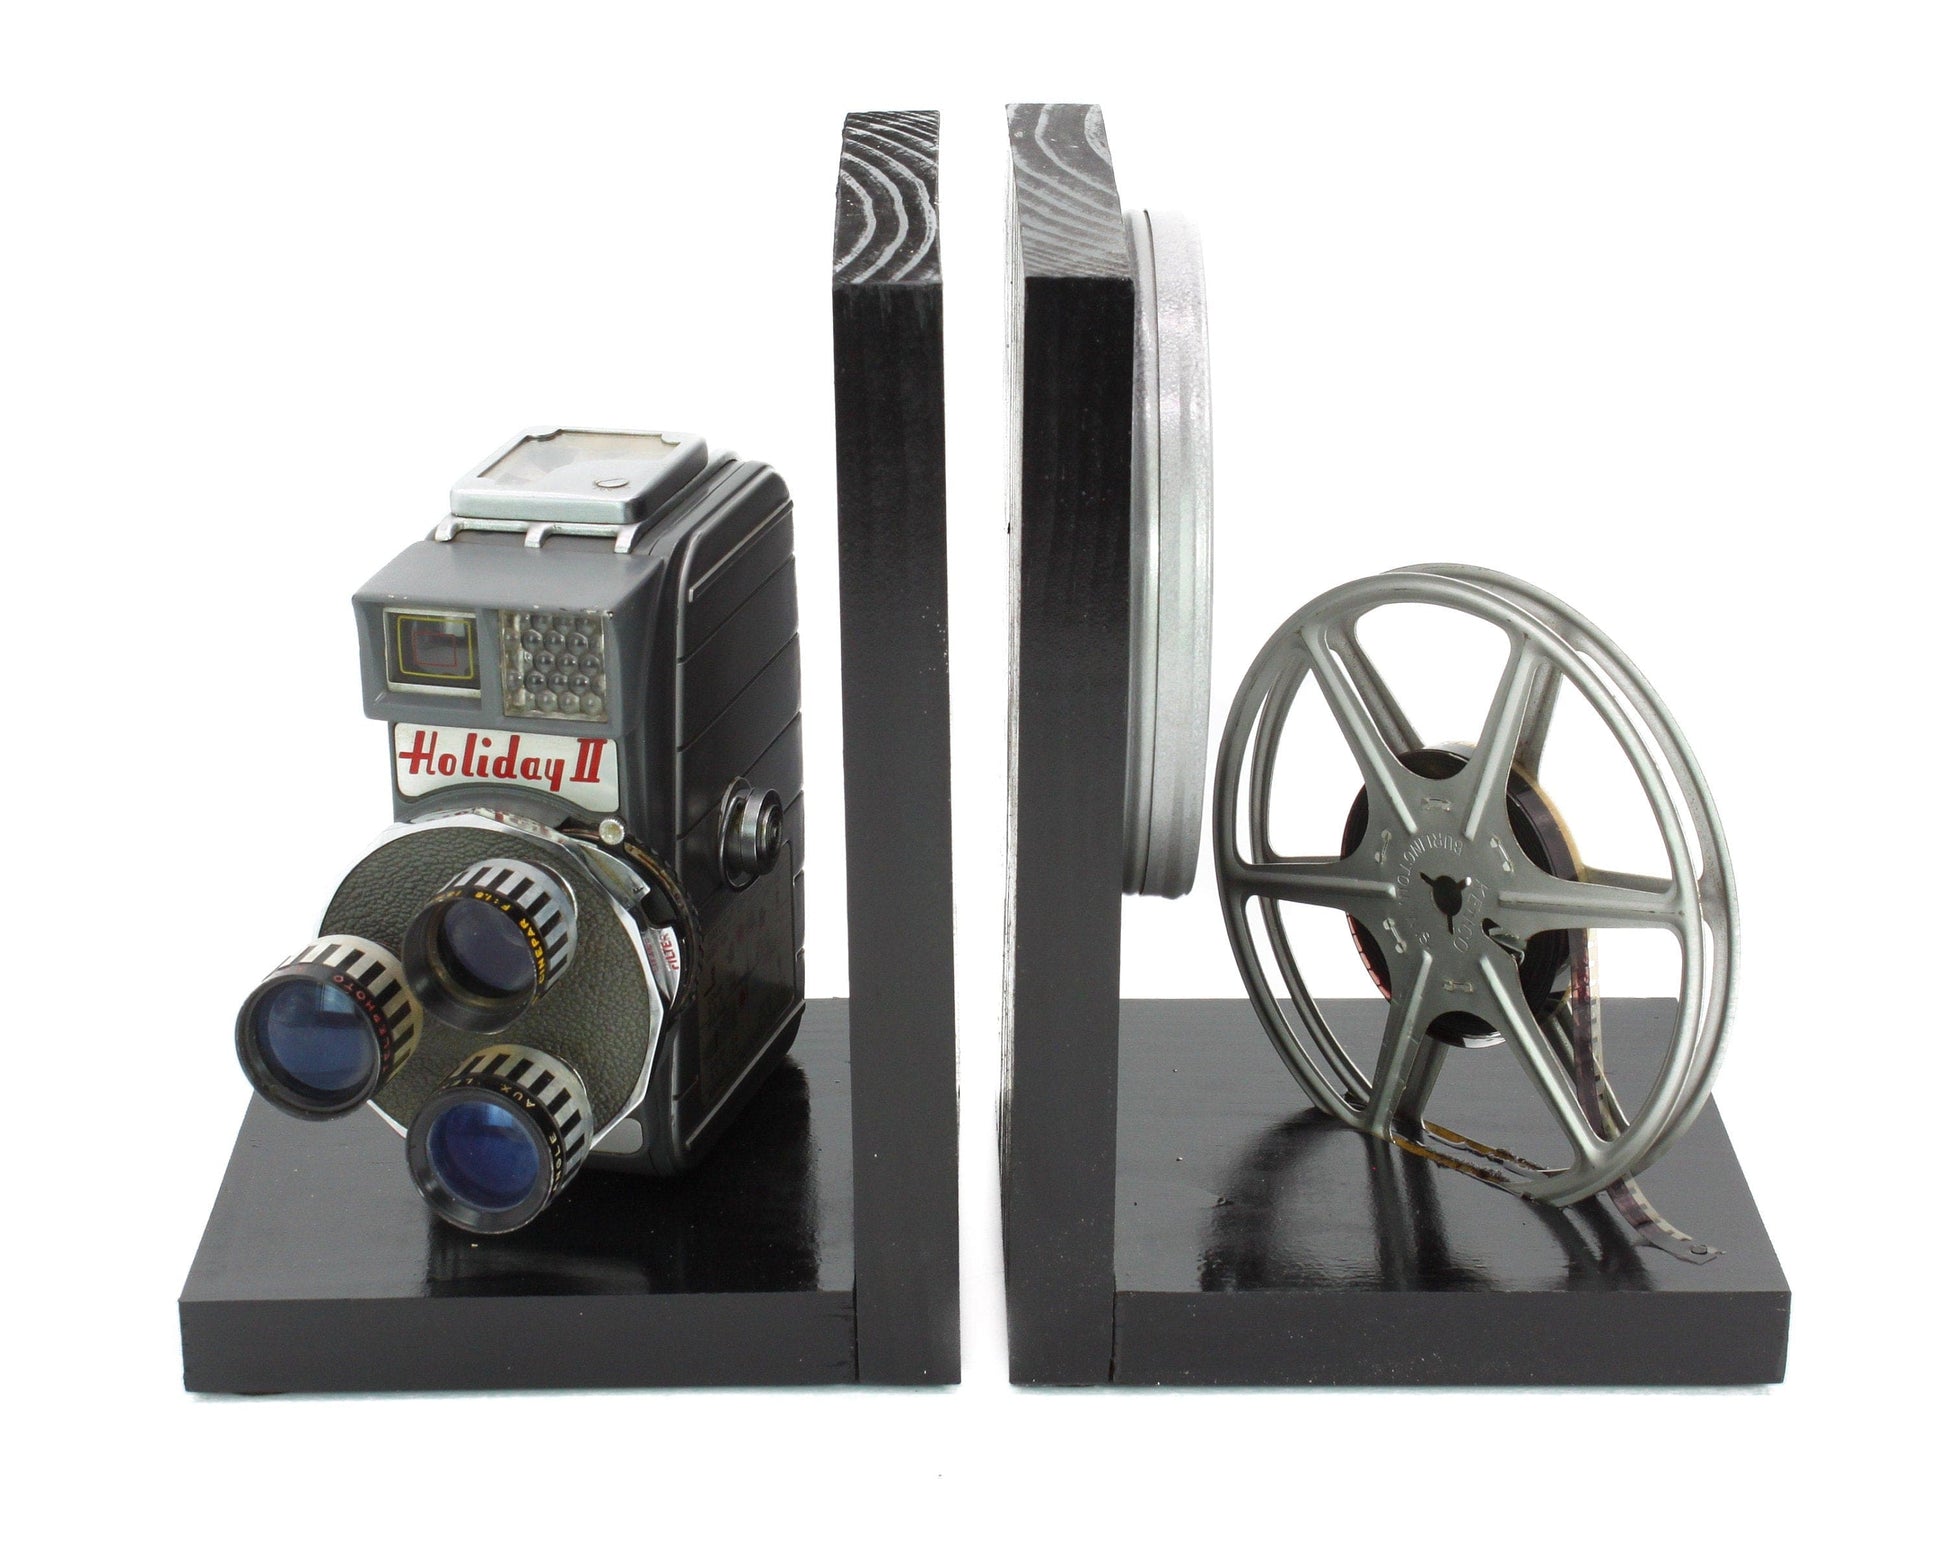 LightAndTimeArt Bookends Vintage Camera Bookends - DVD Holder - Mansfield Holiday II Triple Turret - Movie Room Decor - Film Maker gift - Actor and Actress gift